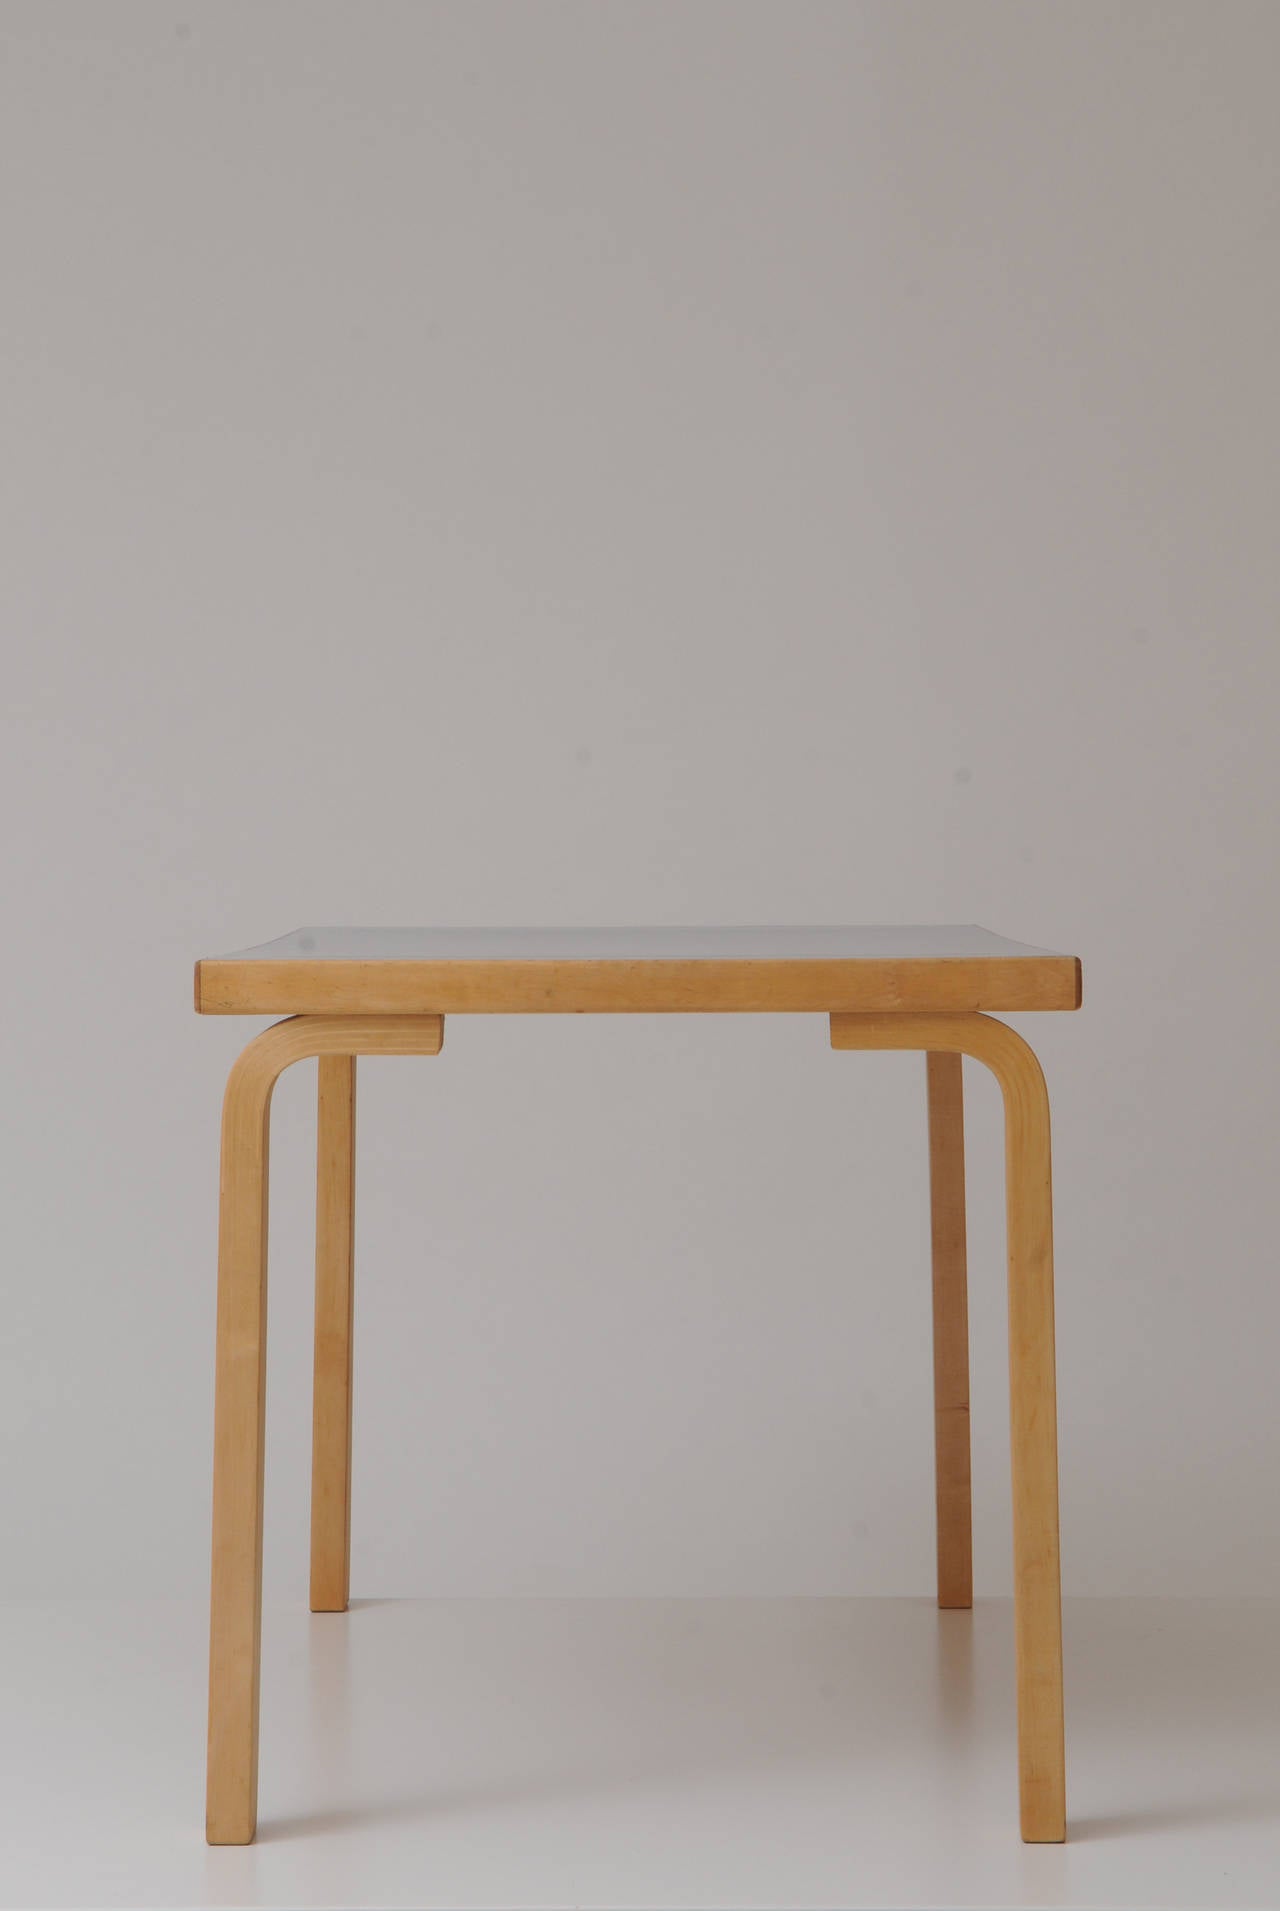 Formica Small Table or Desk by Alvar Aalto